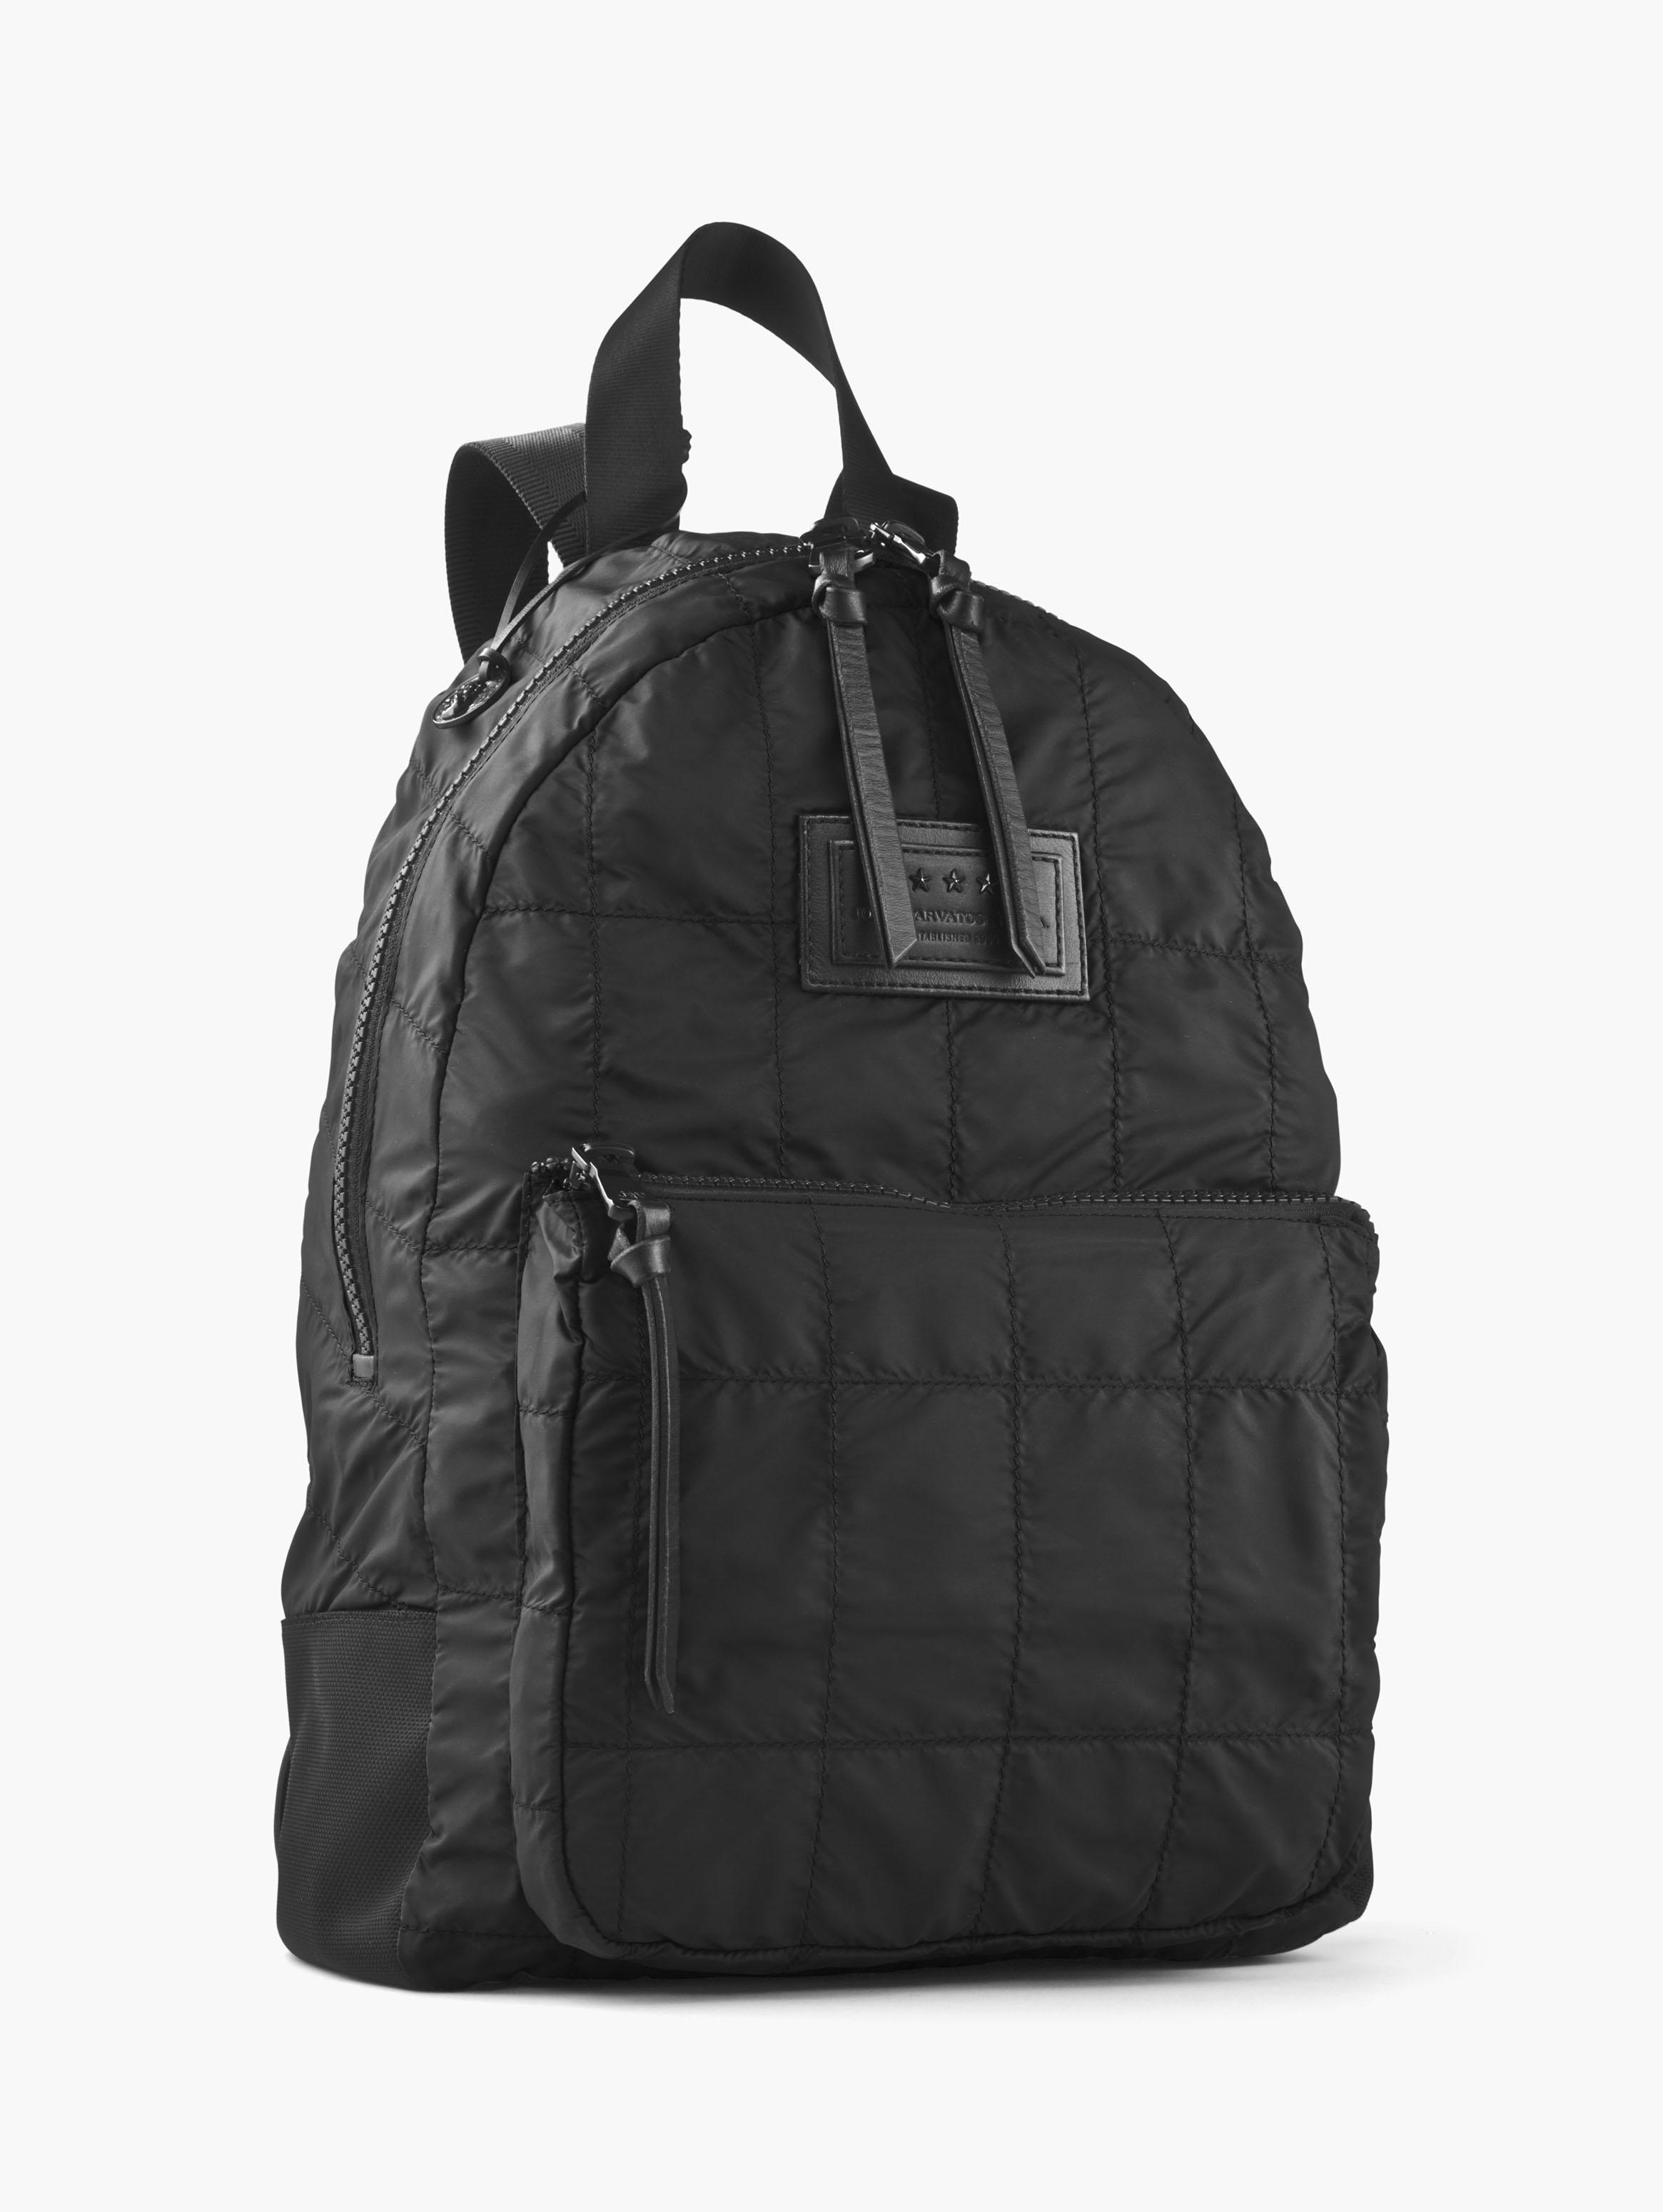 John Varvatos QUILTED NYLON BACKPACK